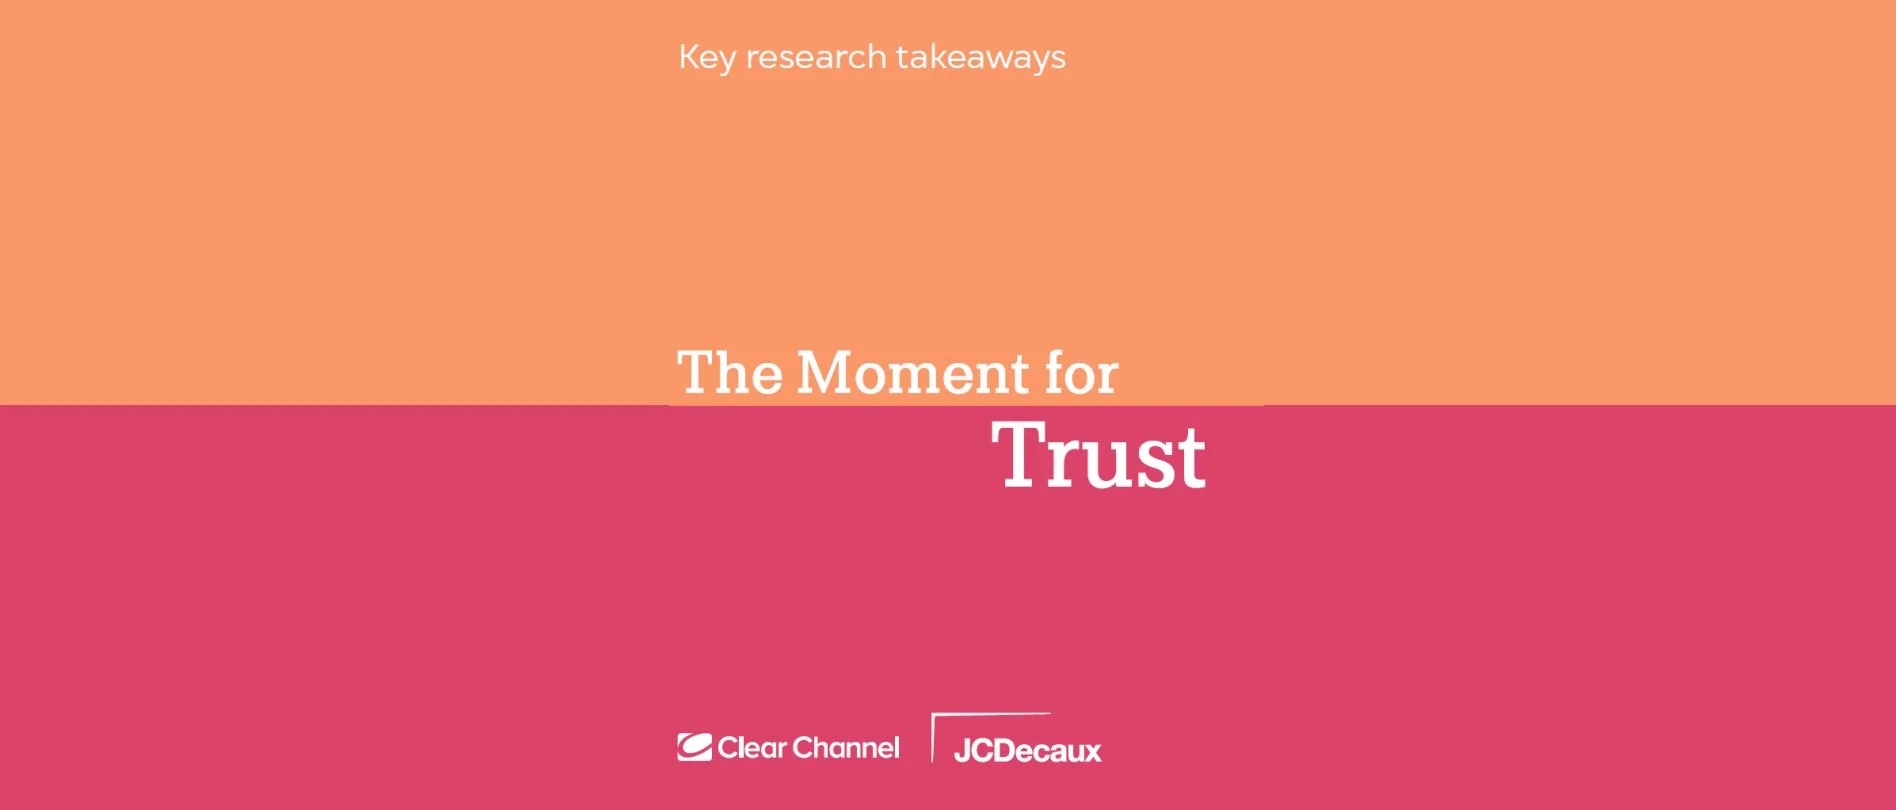 the moment for trust ooh research study